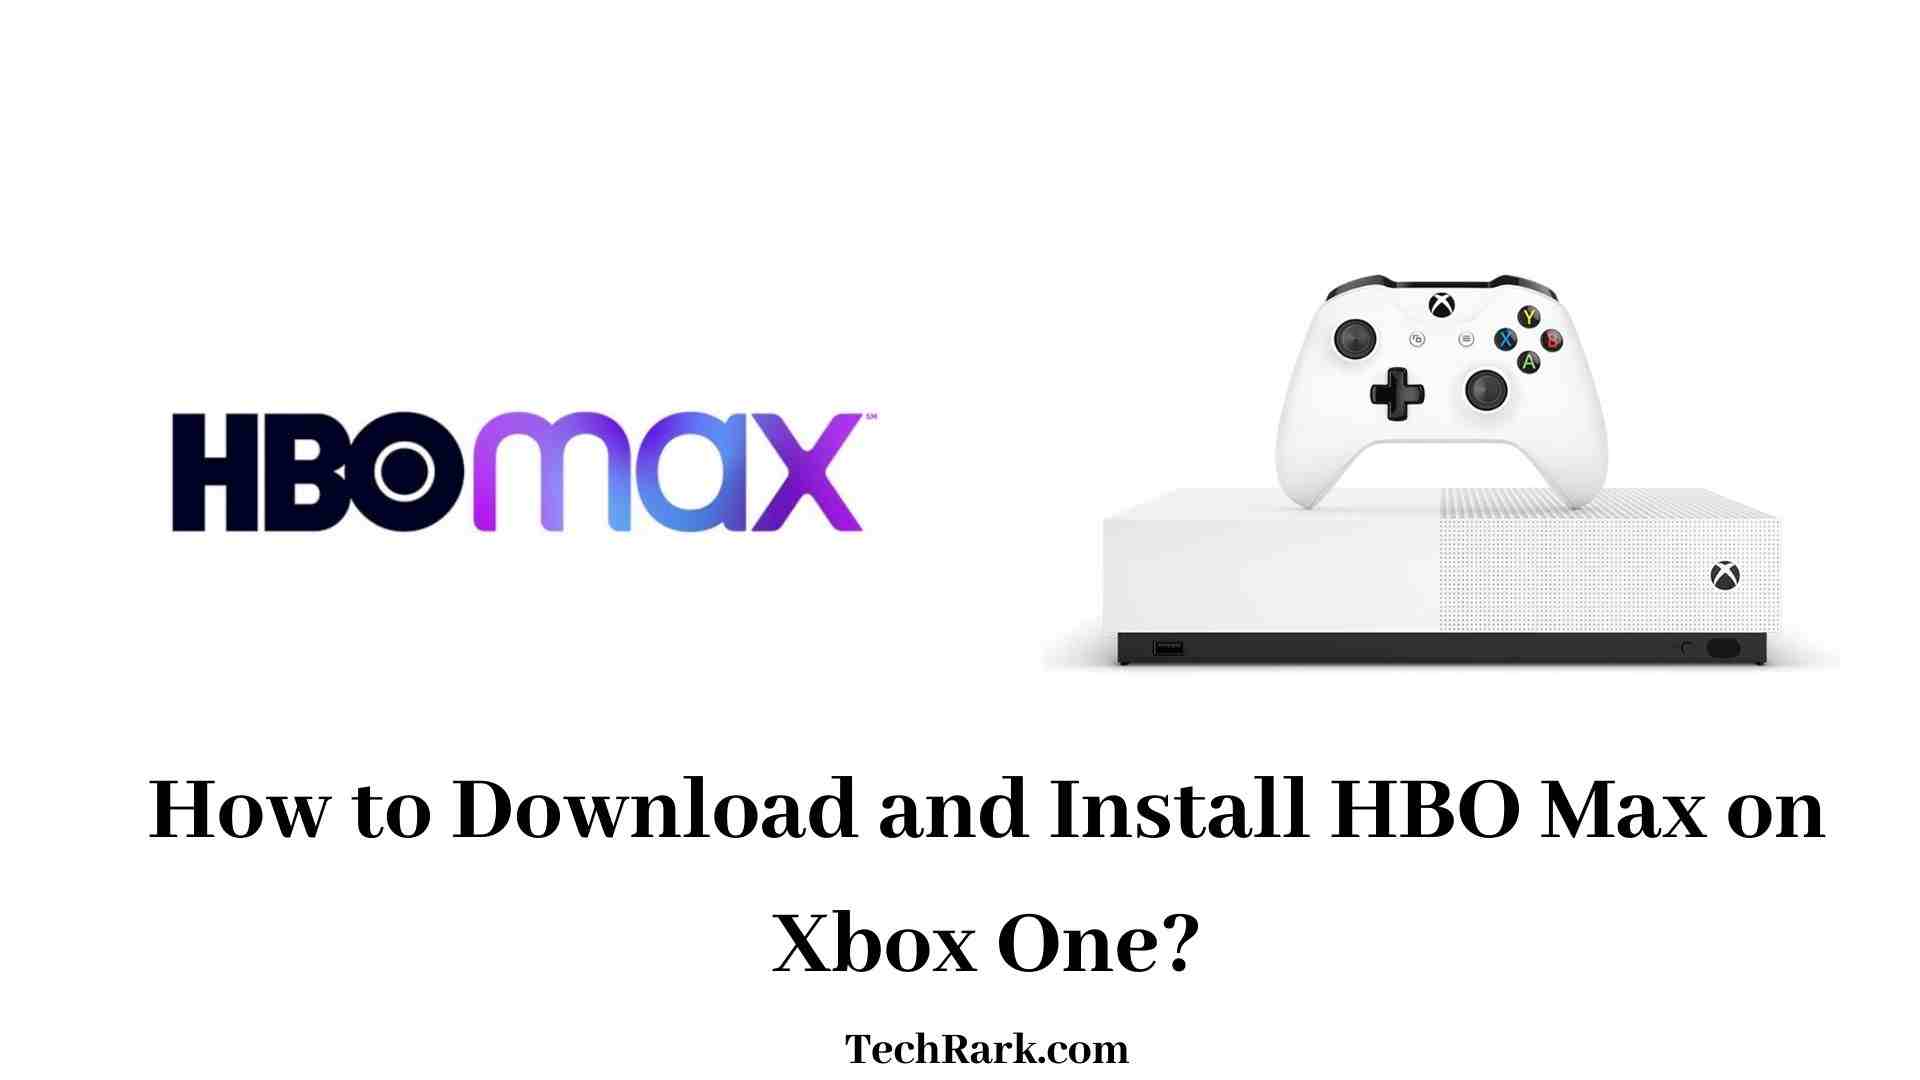 HBO Max on Xbox One